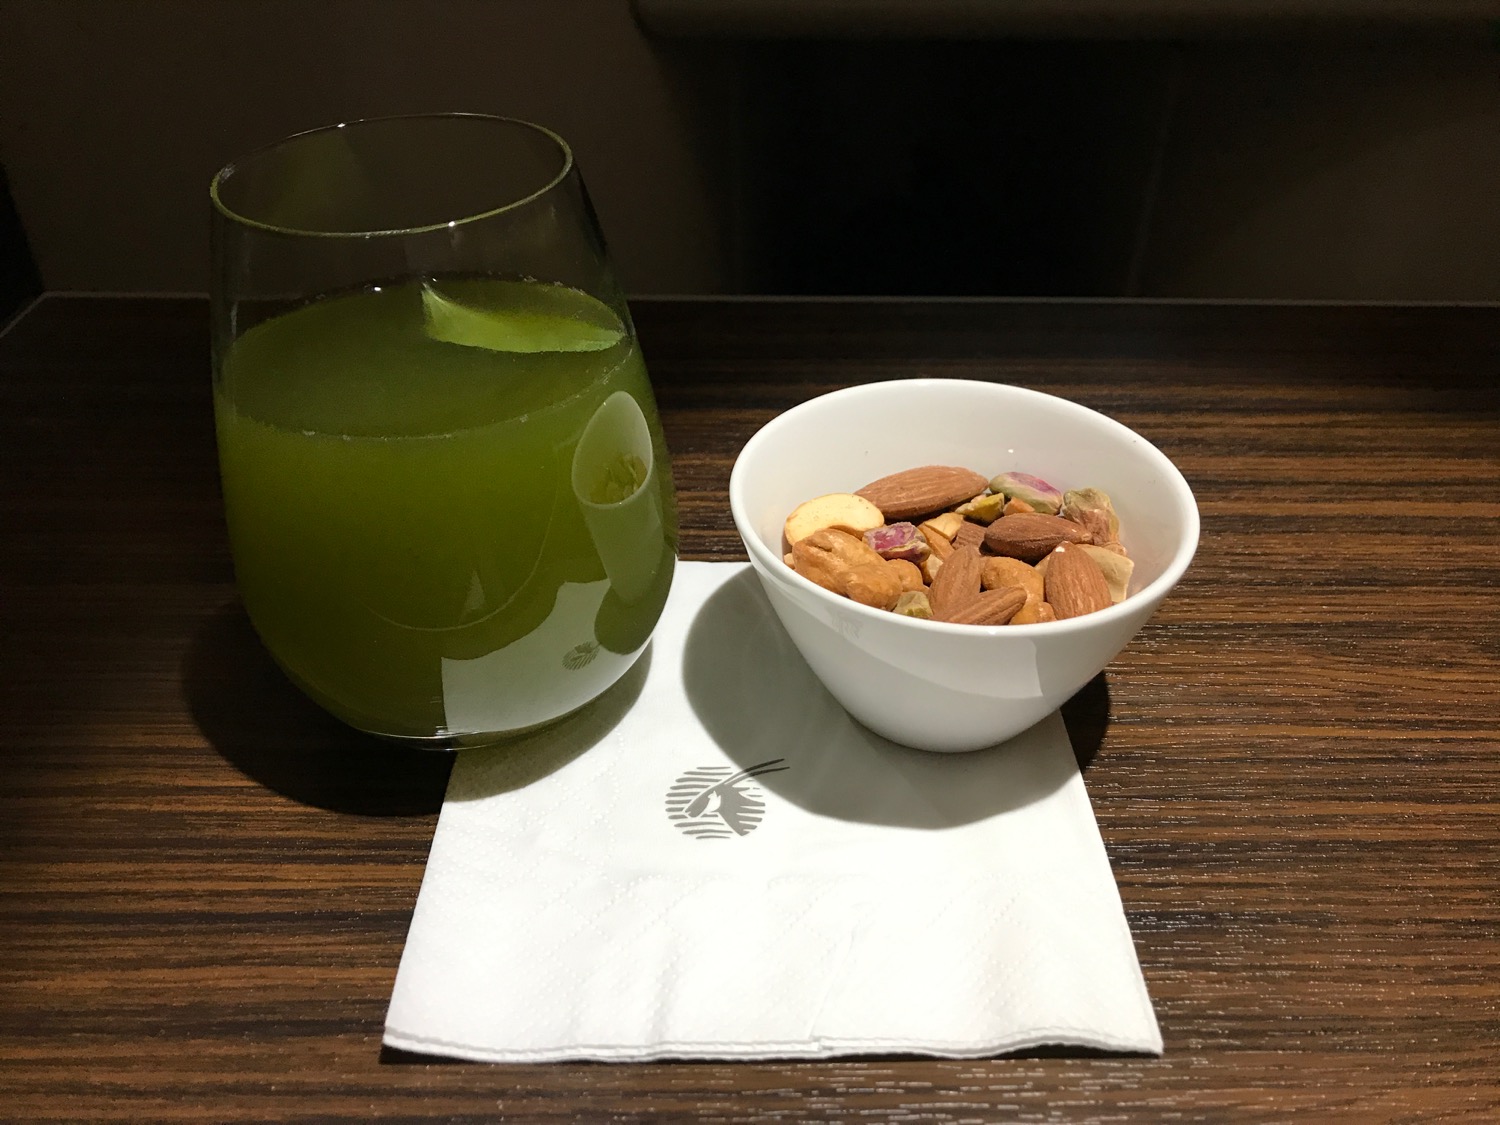 a bowl of nuts and a glass of green liquid